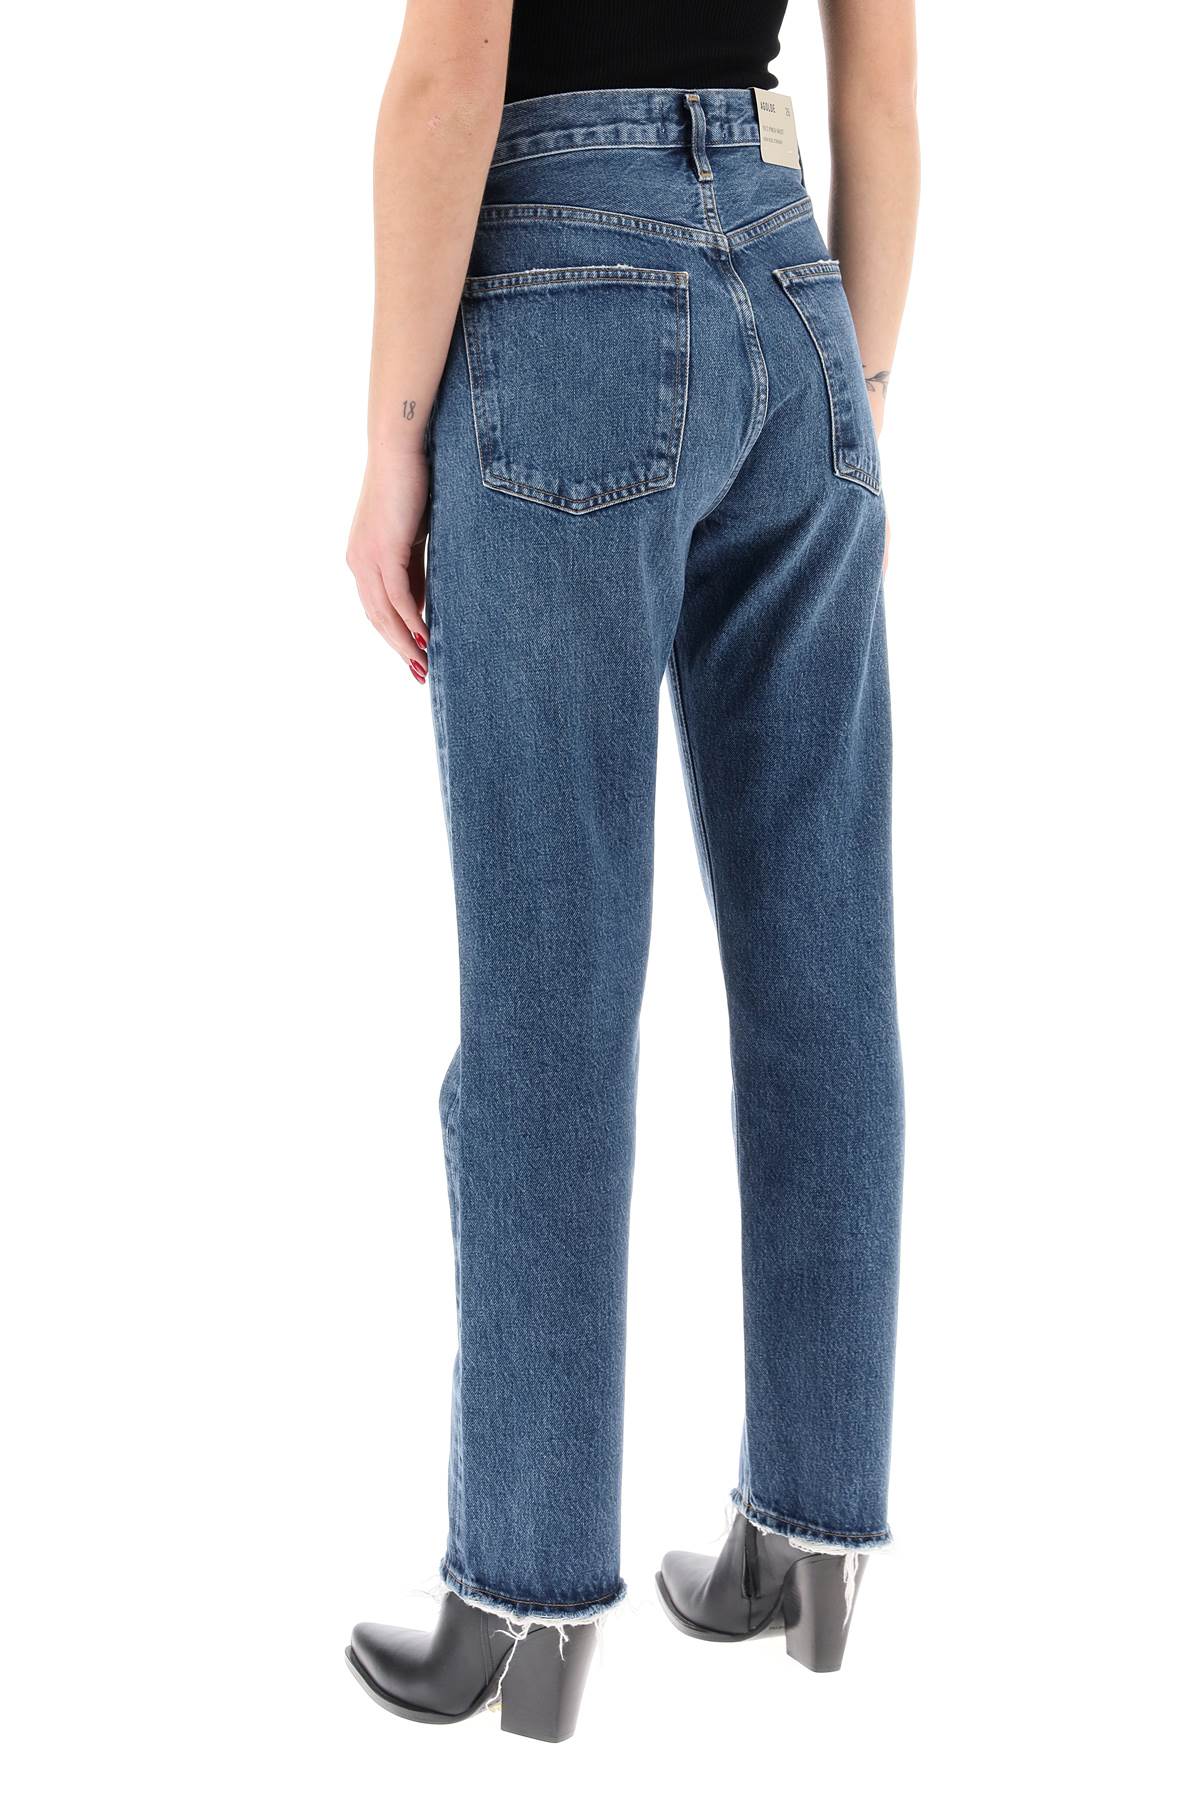 Agolde straight leg jeans from the 90's with high waist-2